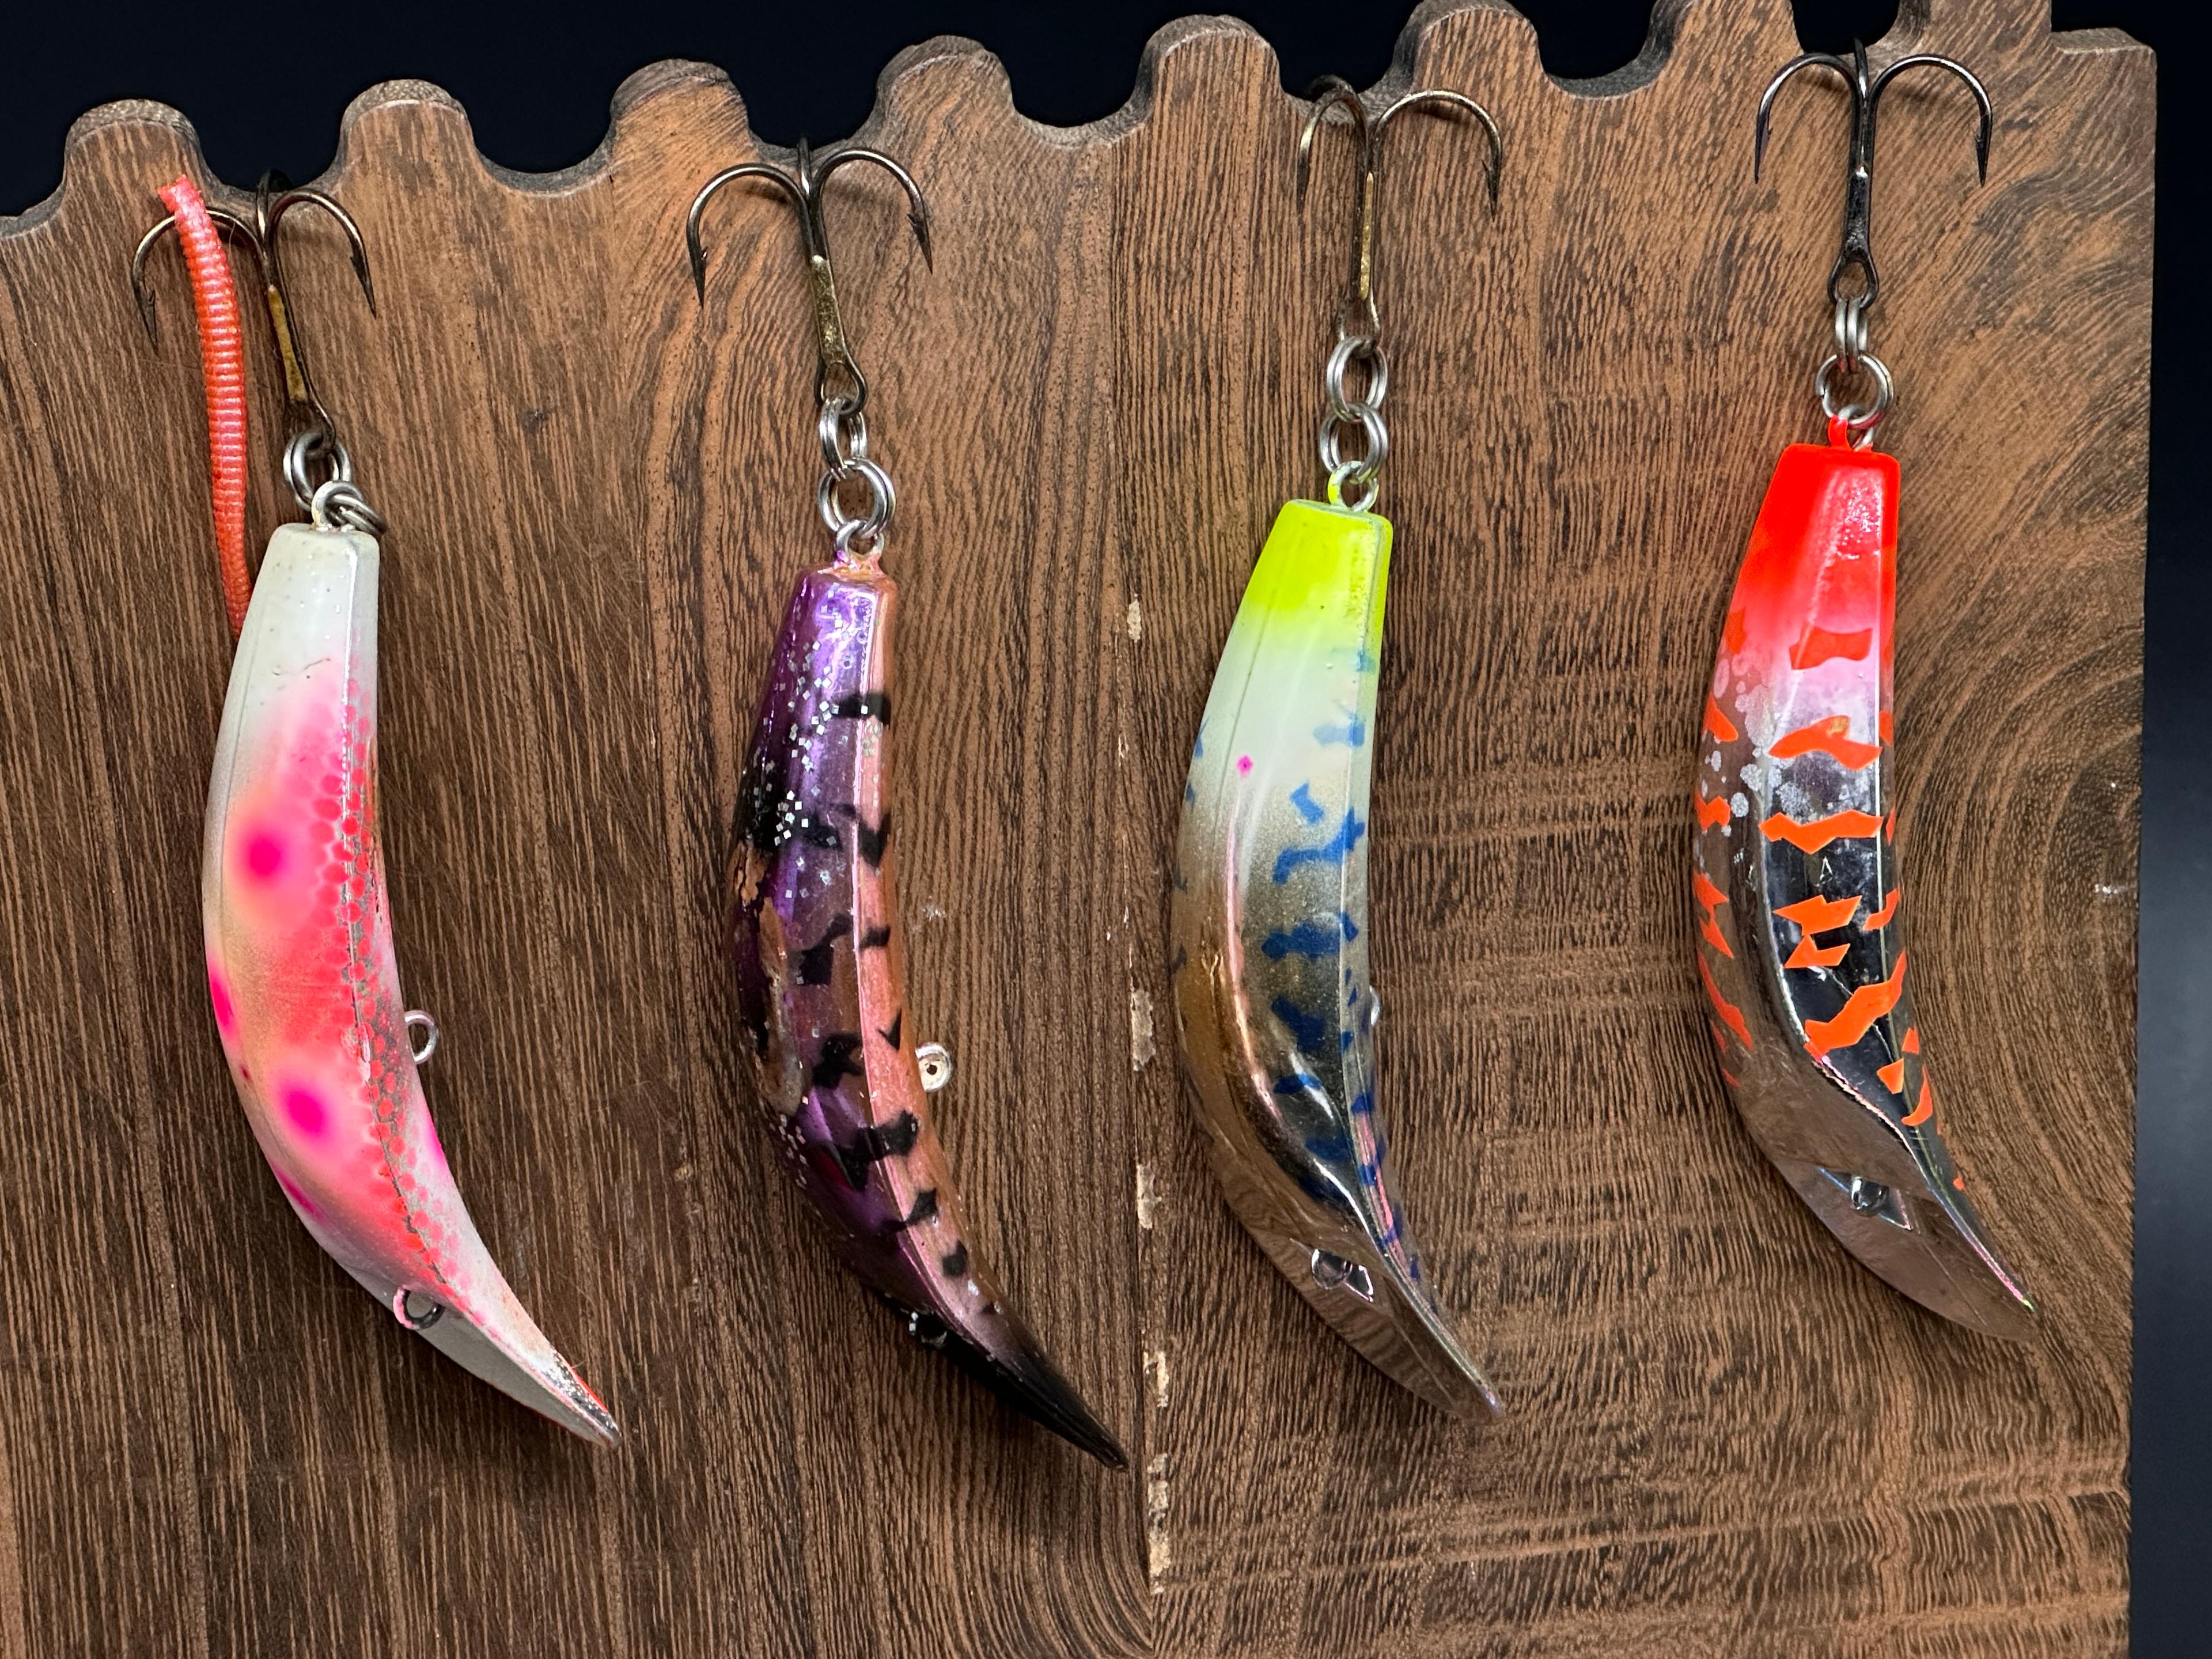 Misc. Fishing Lure's